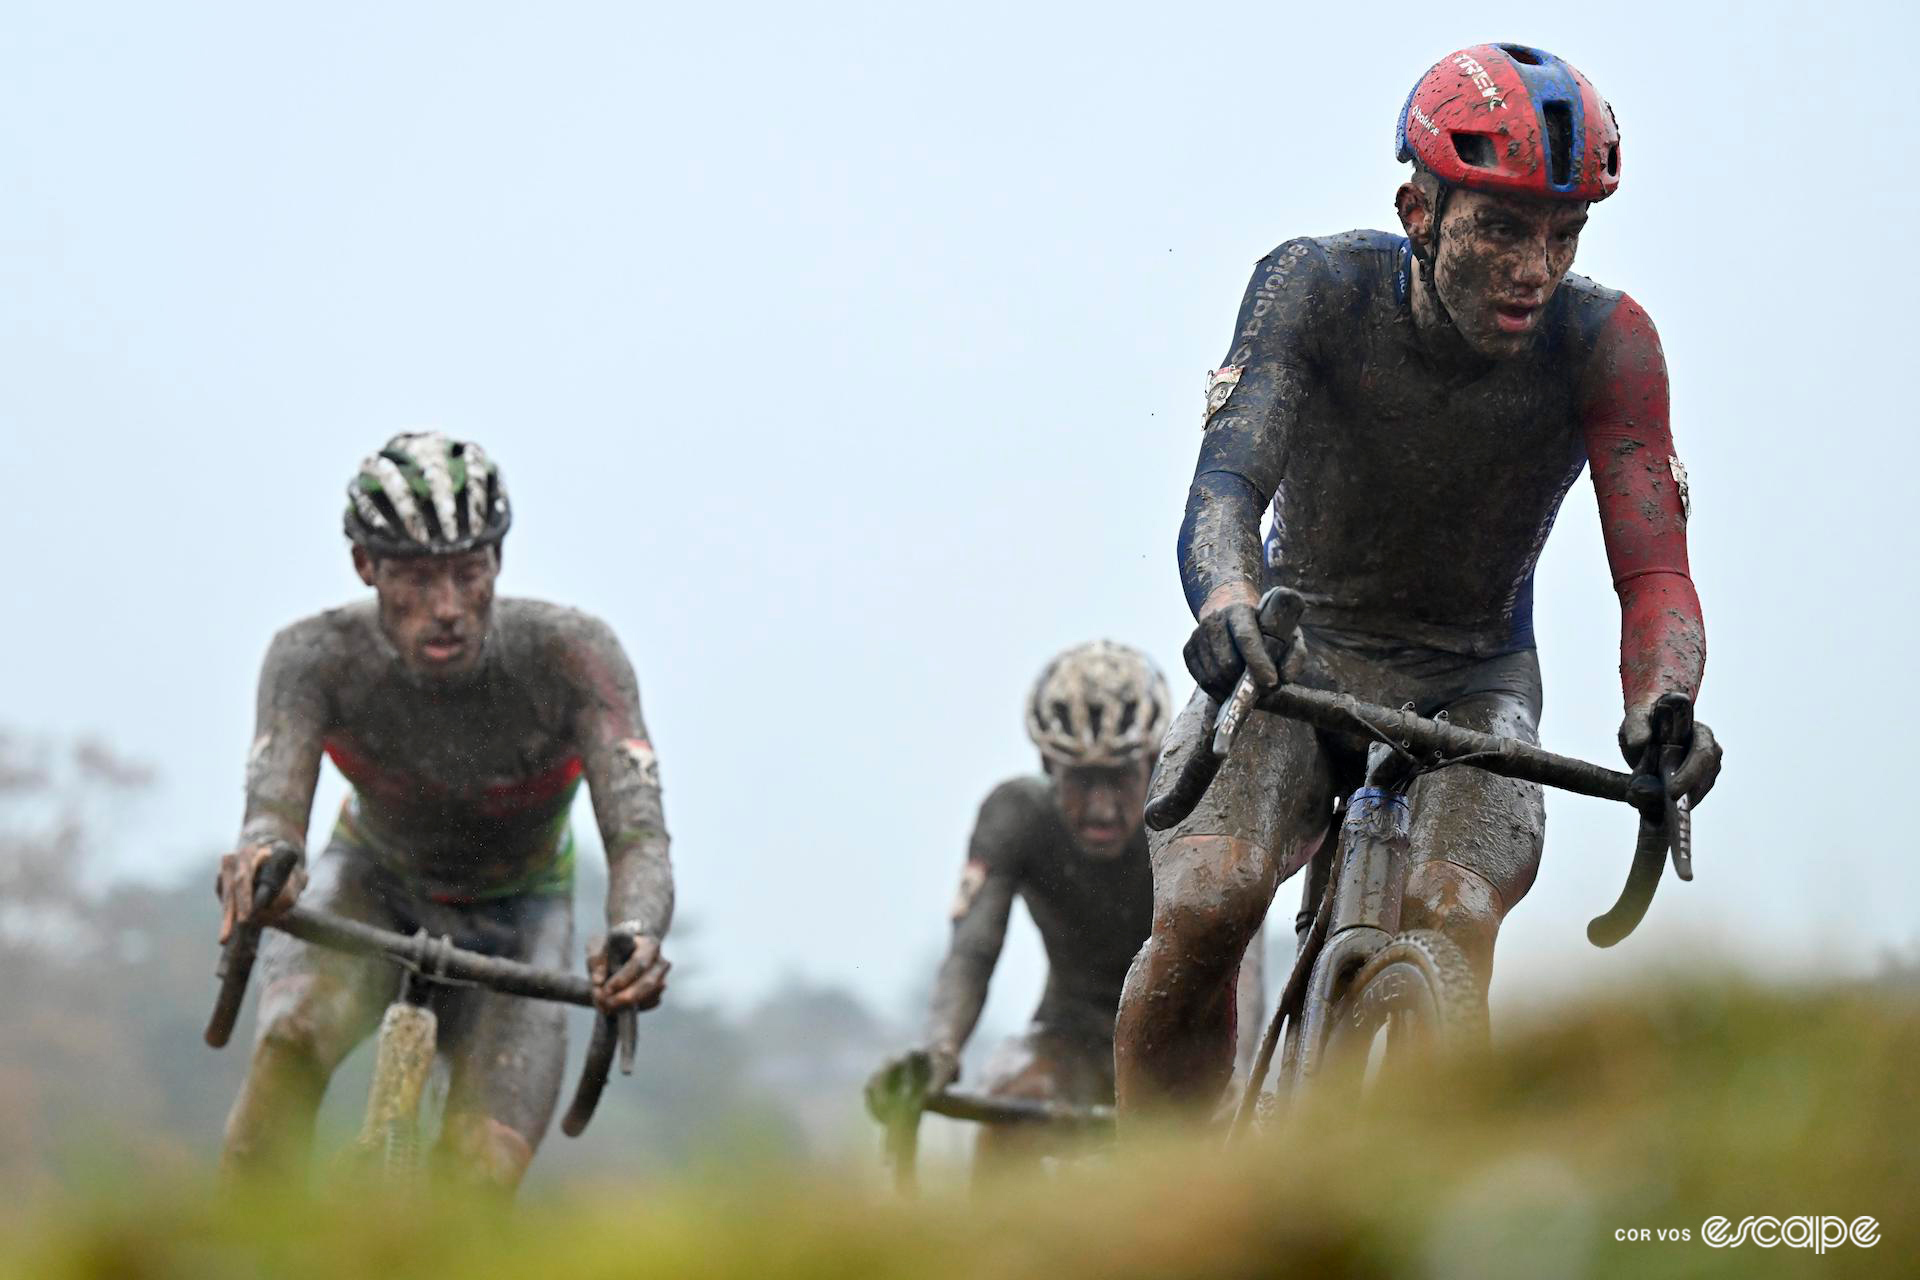 Thibau Nys leads Joran Wyseure and Jens Adams, all of them covered head to toe in mud and looking very weary, late in CX World Cup Dublin, a grey overcast sky overhead.